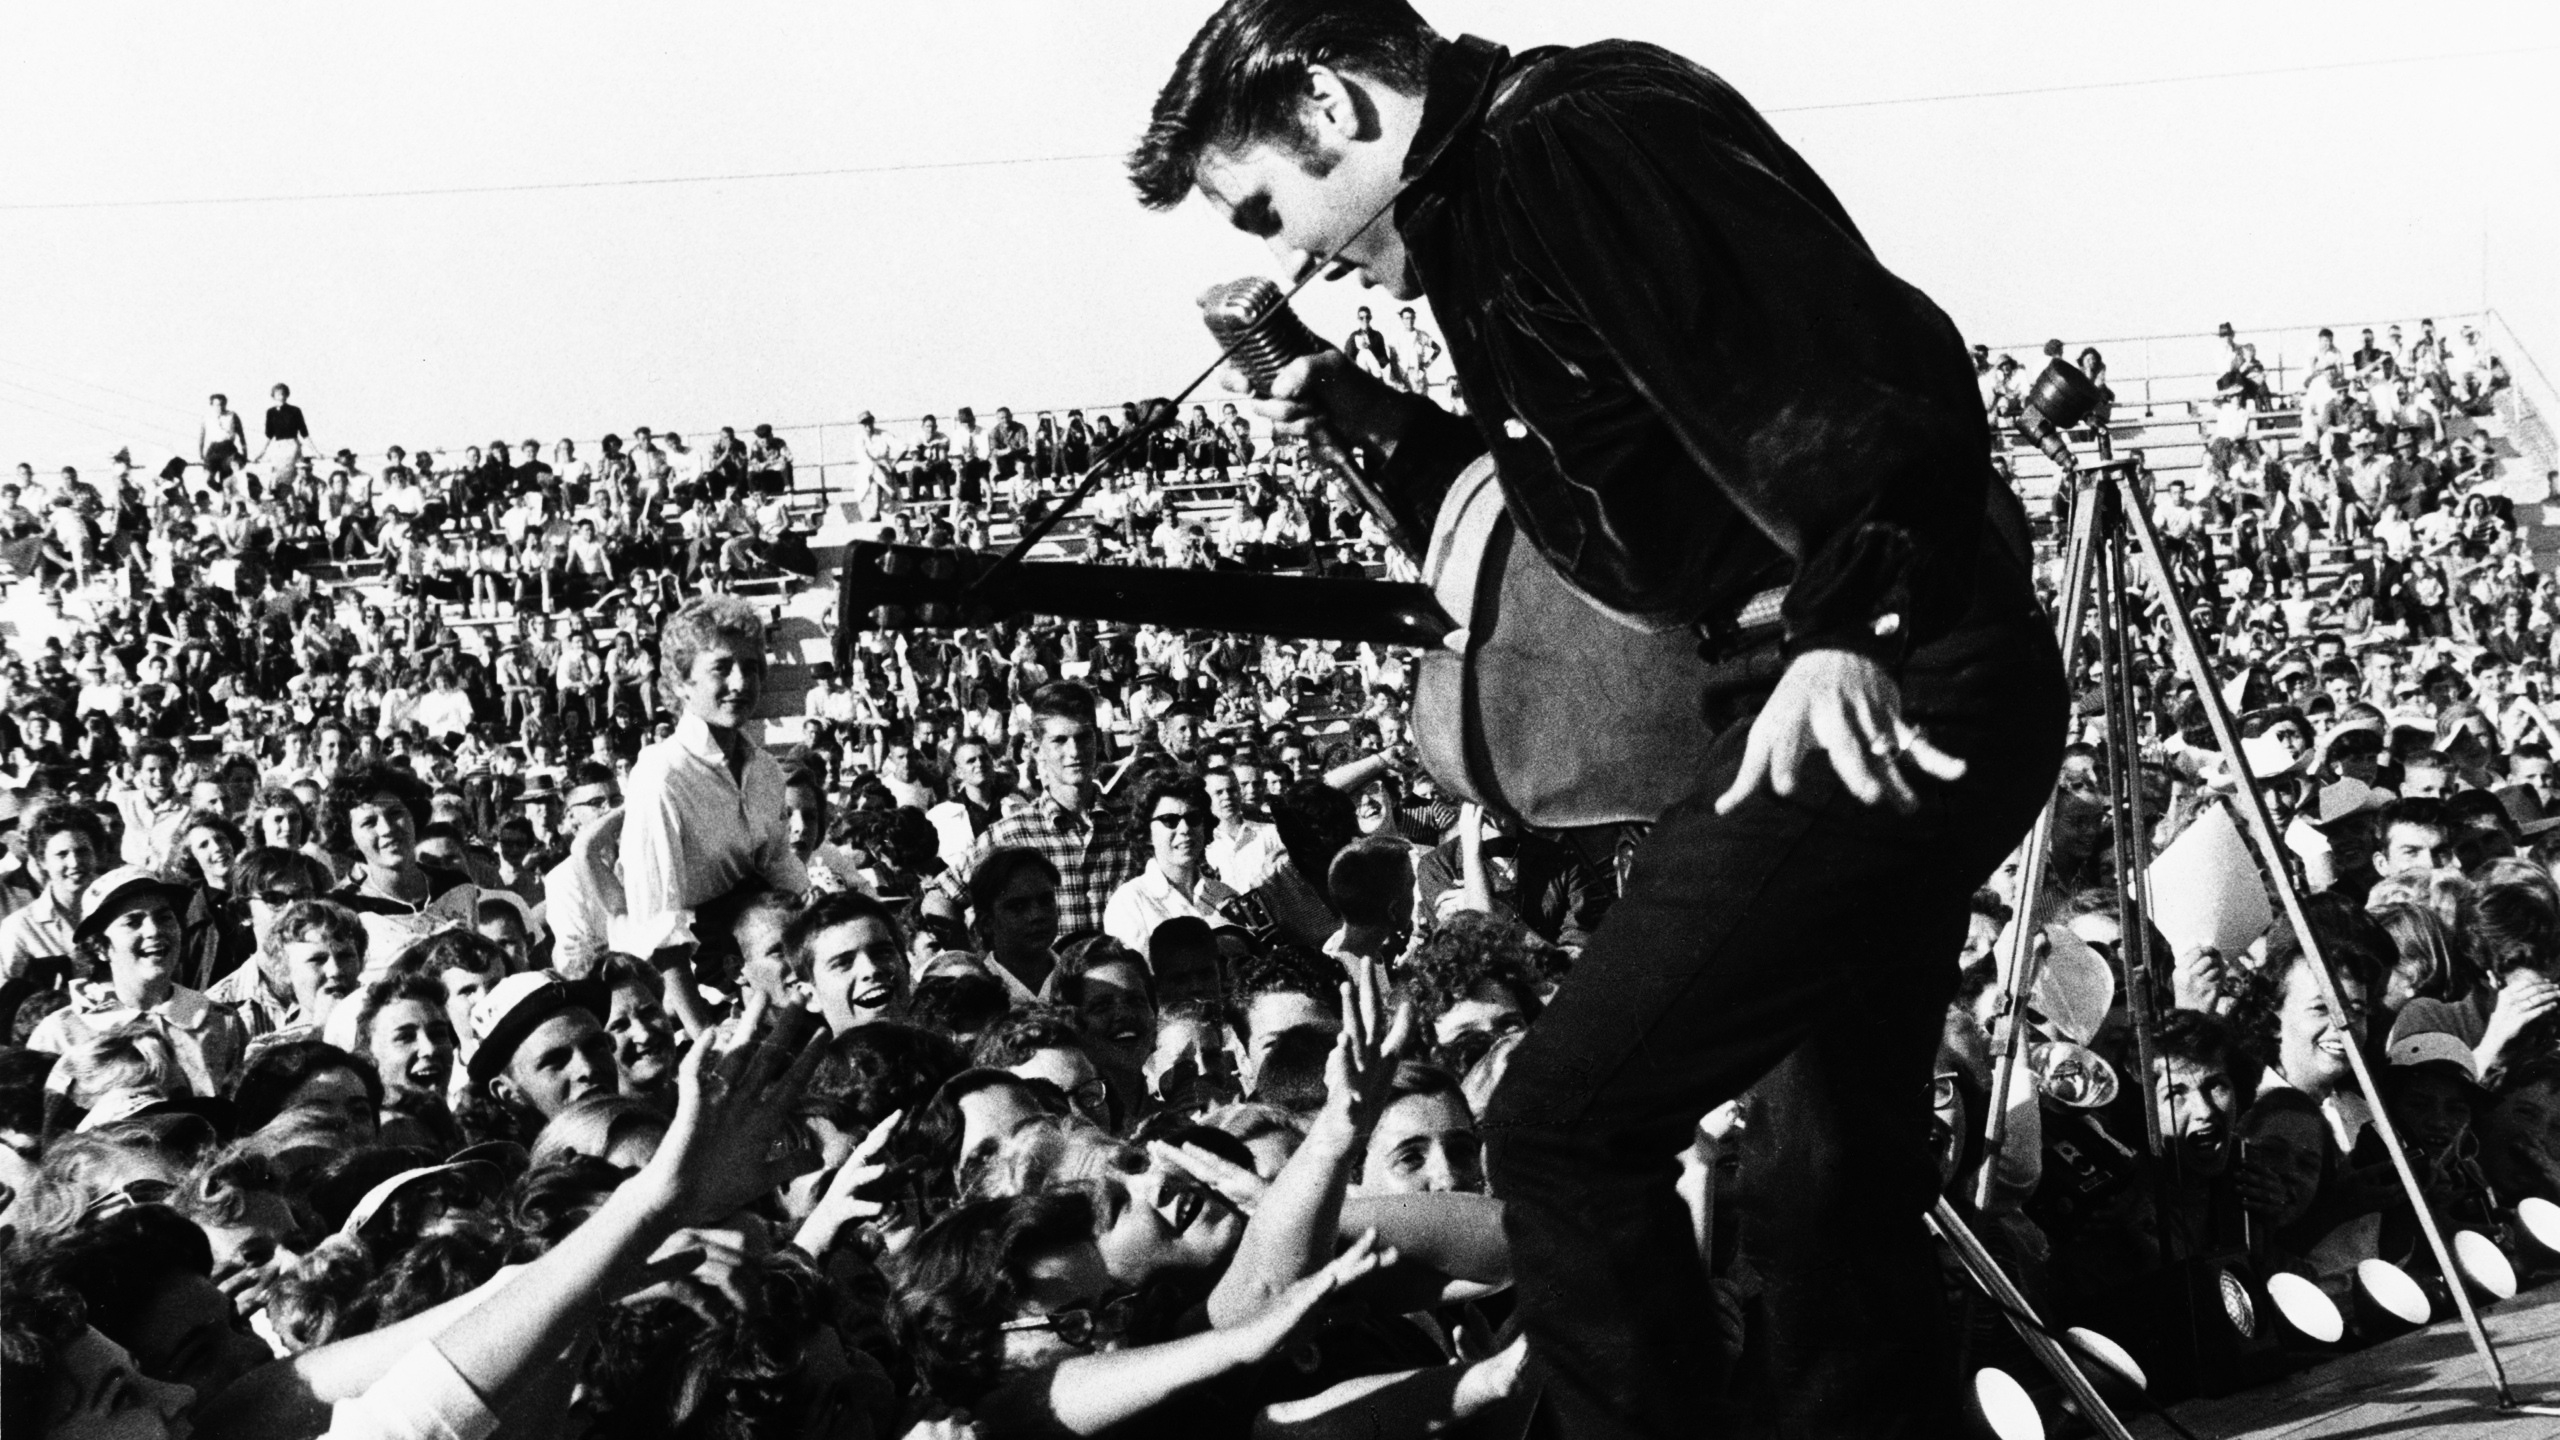 Elvis Presley on The Stage for 2560x1440 HDTV resolution